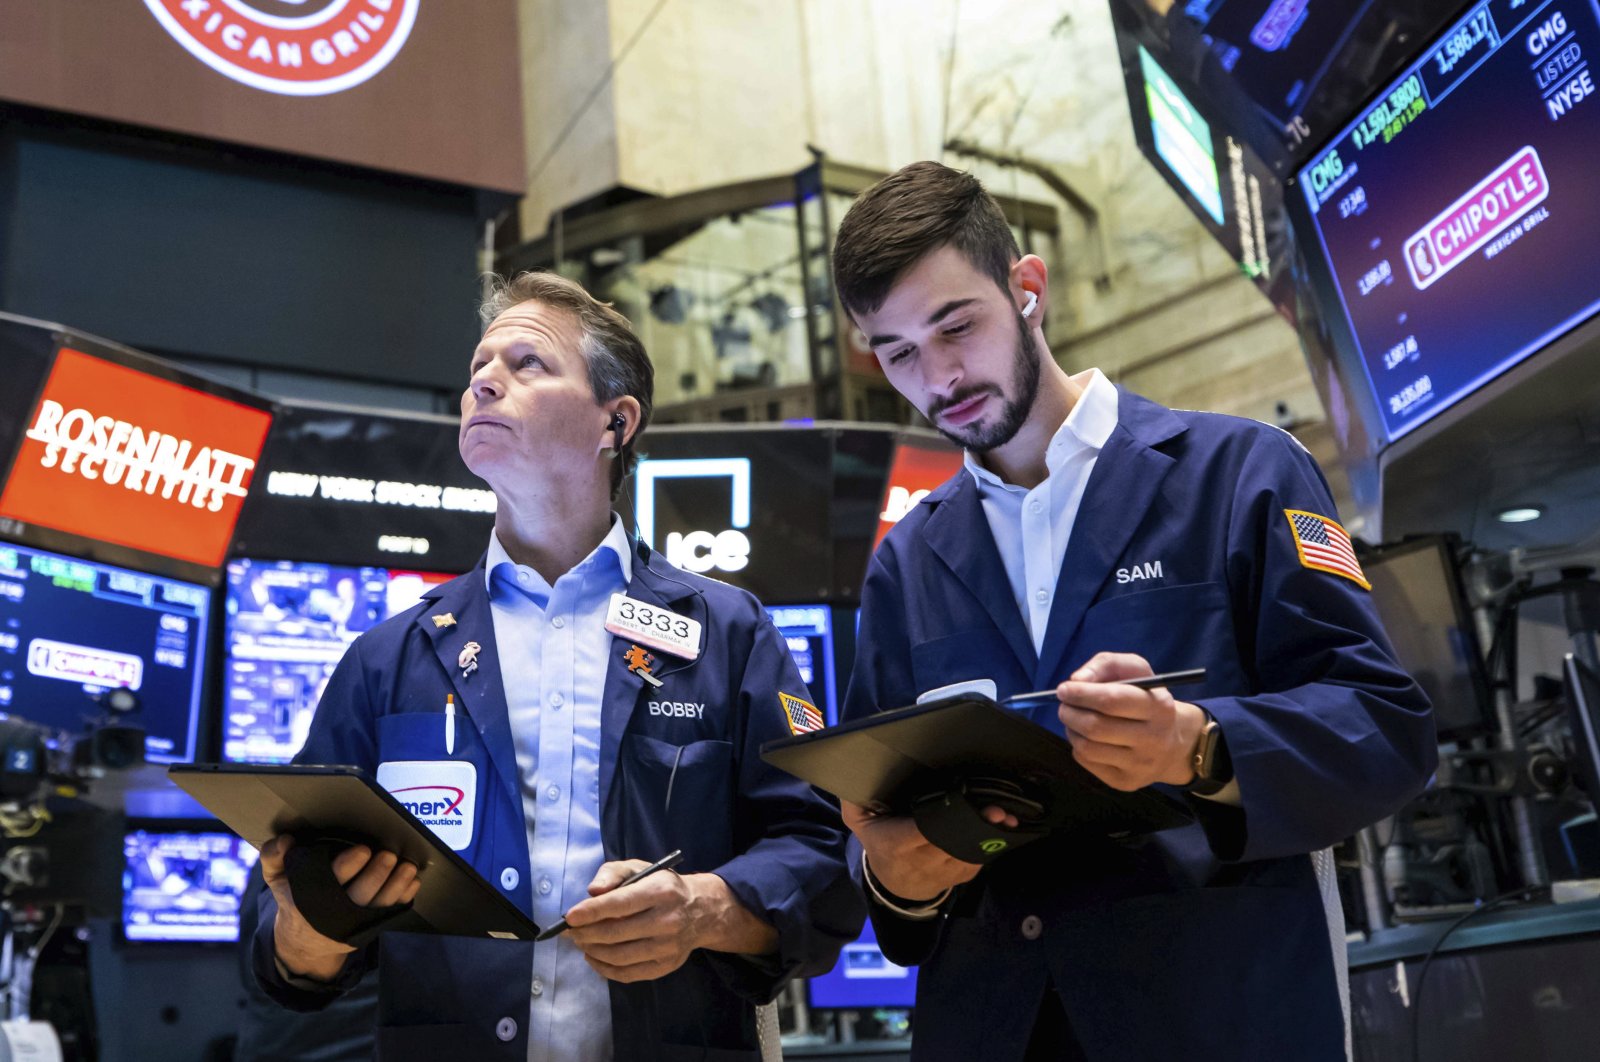 In this photo provided by the New York Stock Exchange, traders work on the floor, Tuesday, Feb. 15, 2022. (David L. Nemec/New York Stock Exchange via AP)